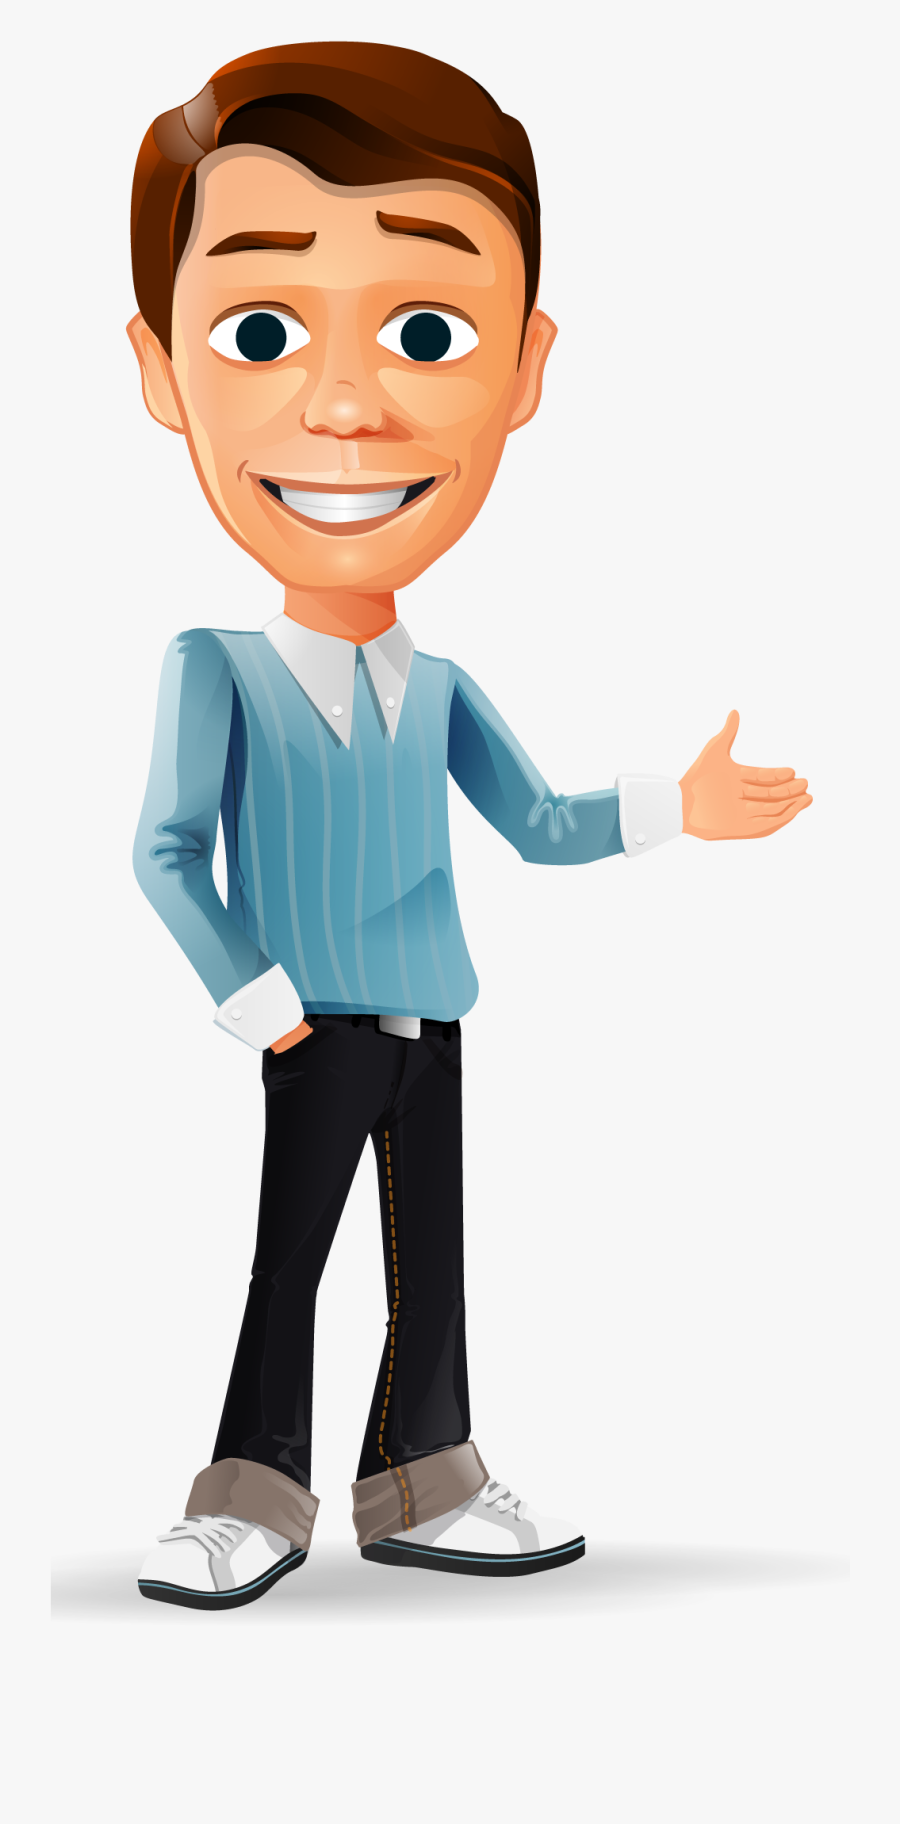 Animation Png Hd - Animated Characters Png, Transparent Clipart